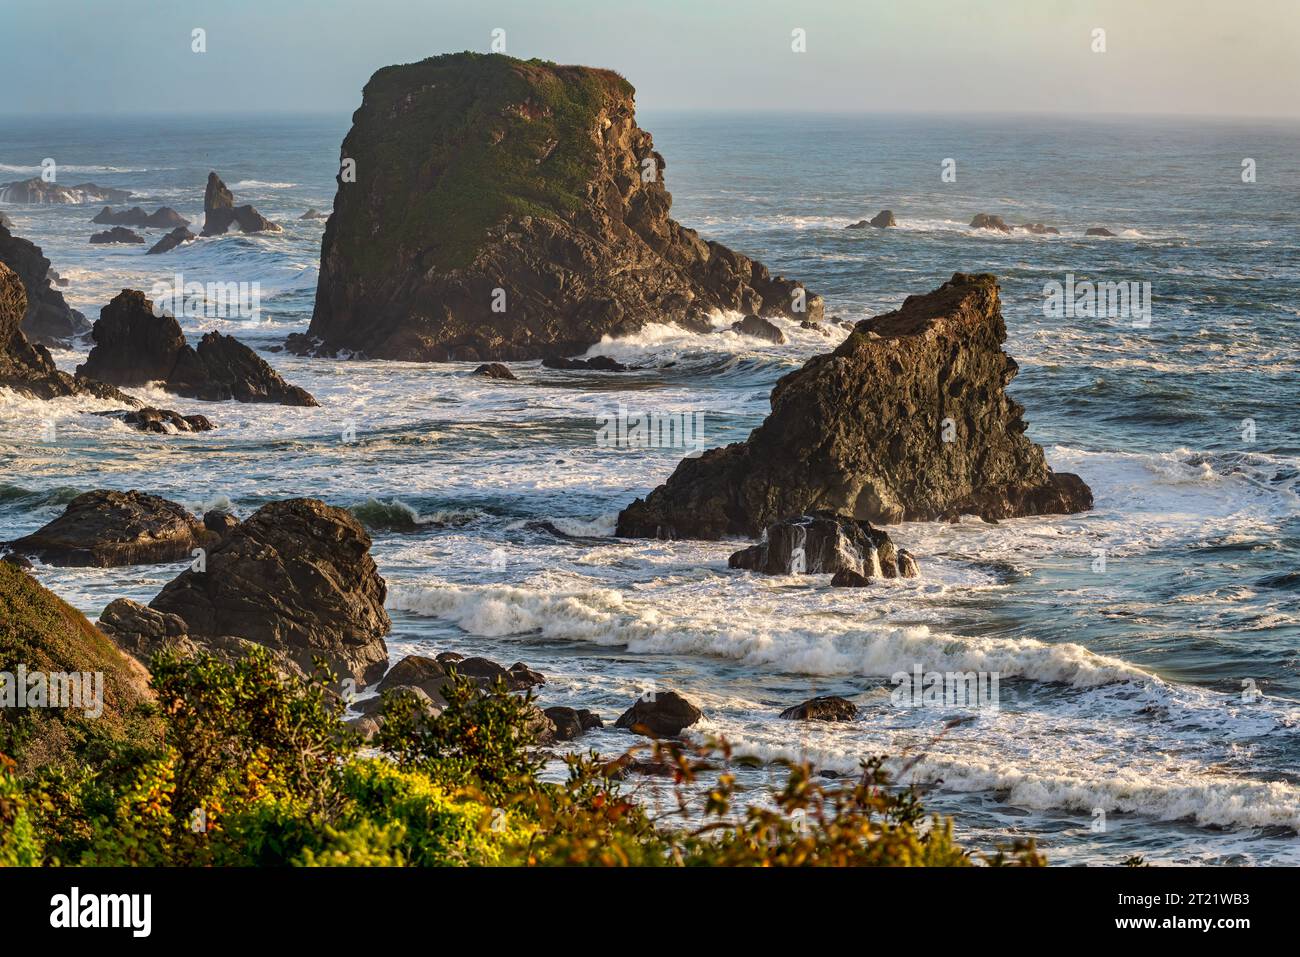 A view of land formations in the sea in Brookings, Oregon. Stock Photo